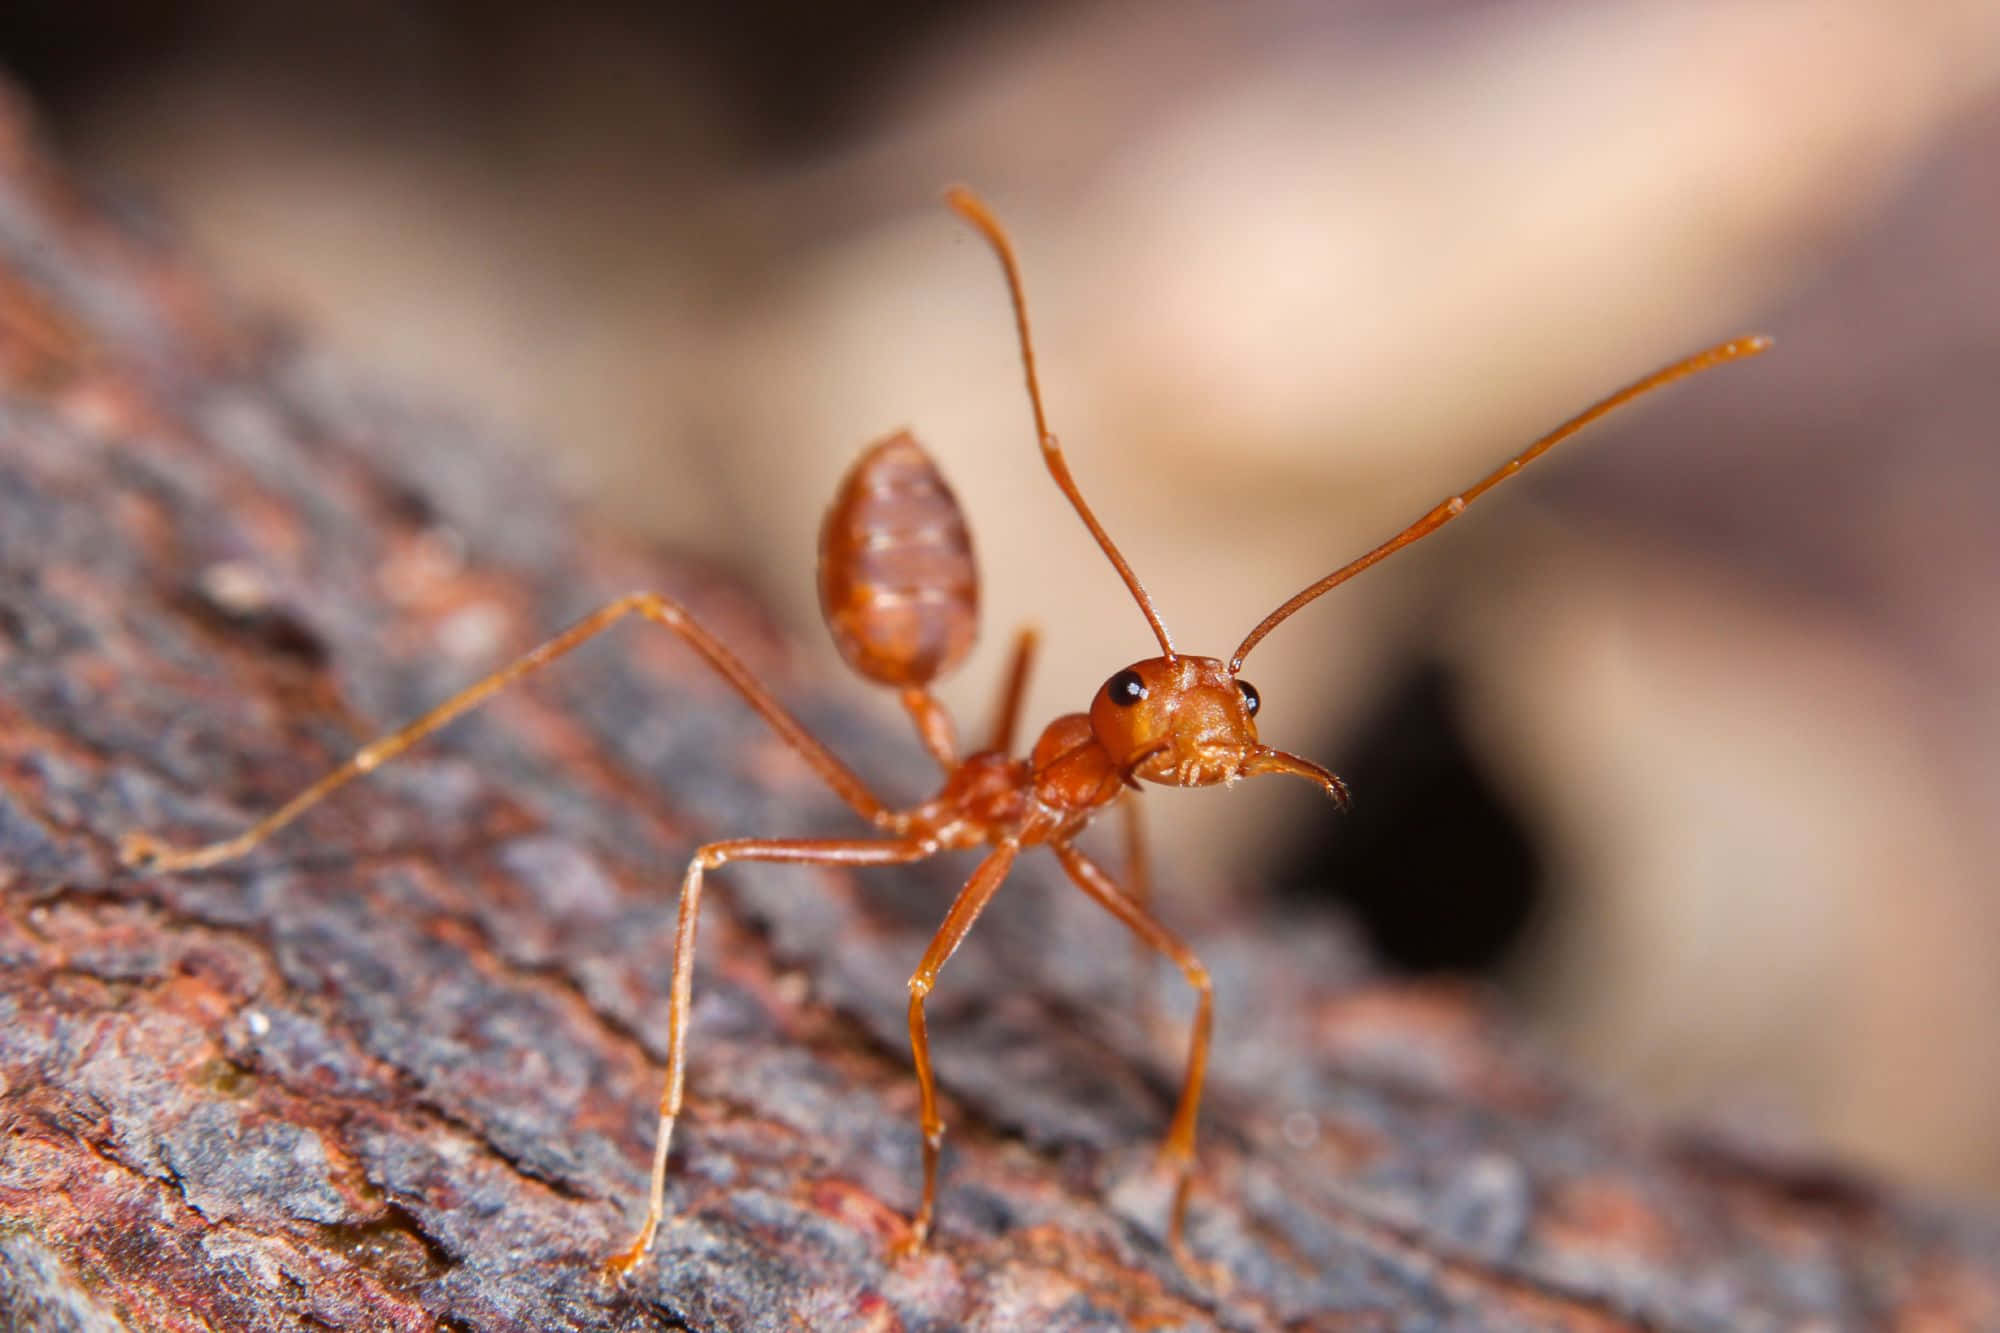 A peculiar ant going about its day